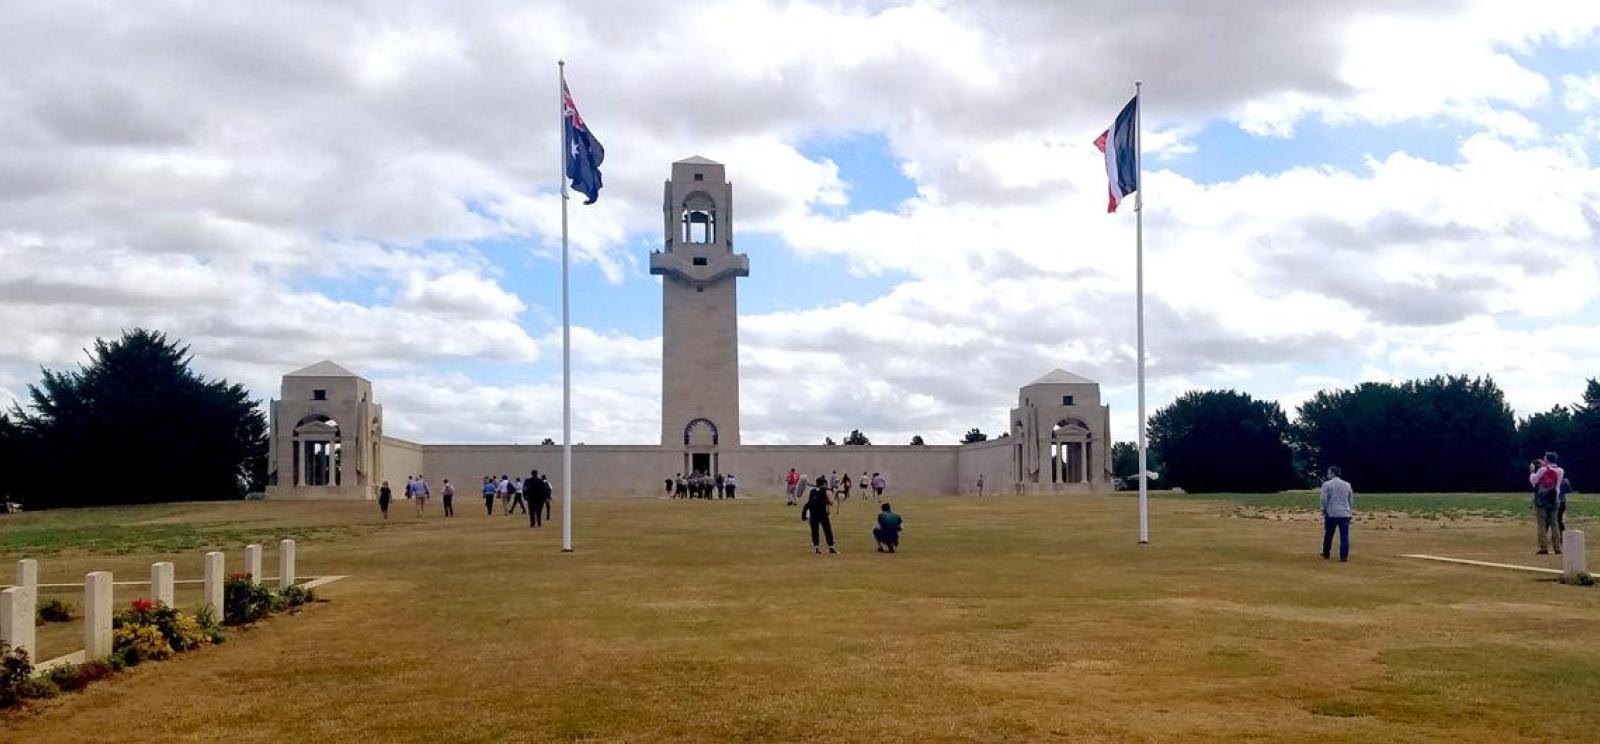 Modern photograph of an open field with a stone war memorial on one end. The memorial features two small buildings on either side and a bell tower in the center. Various tourists sit and stand close and far away from the memorial.